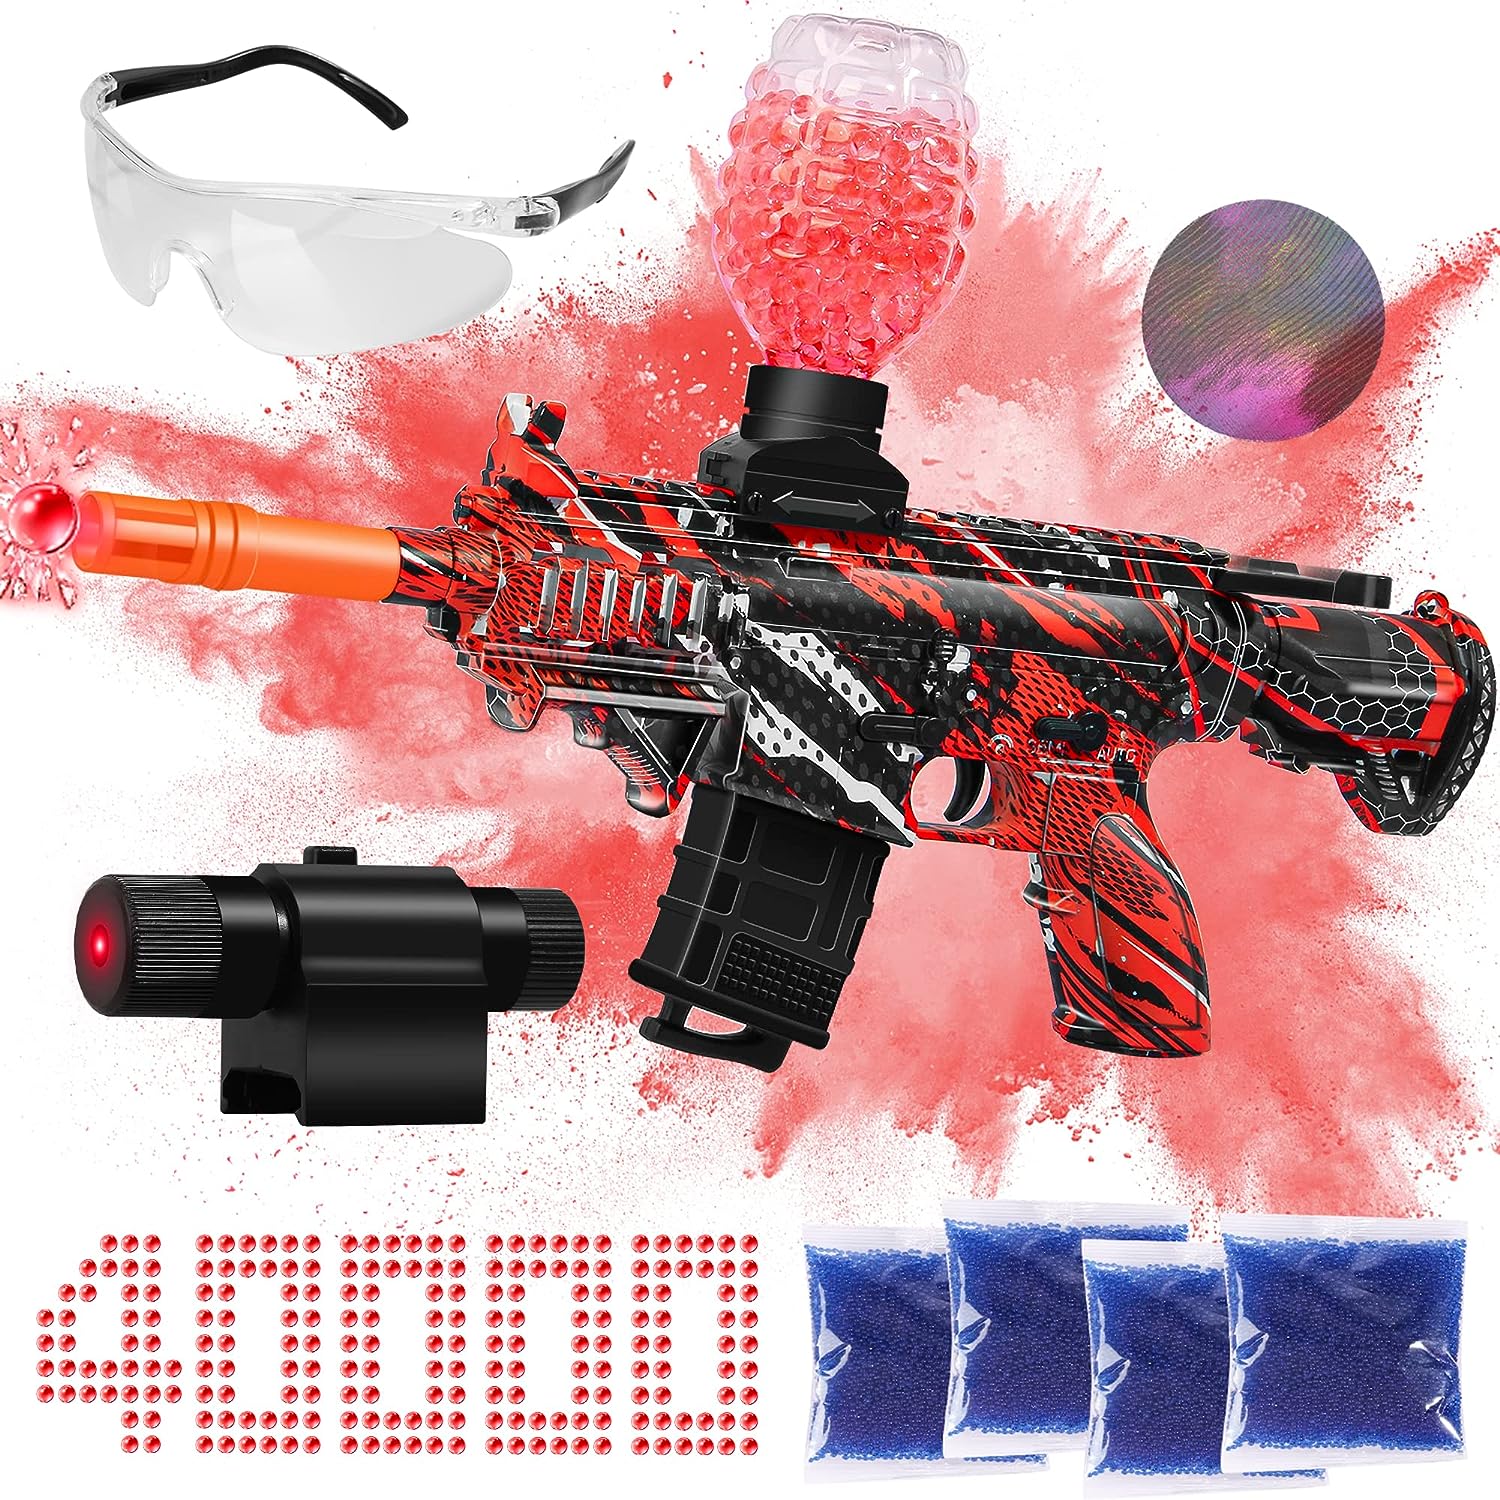 Red and black orbeez gun and accessories.